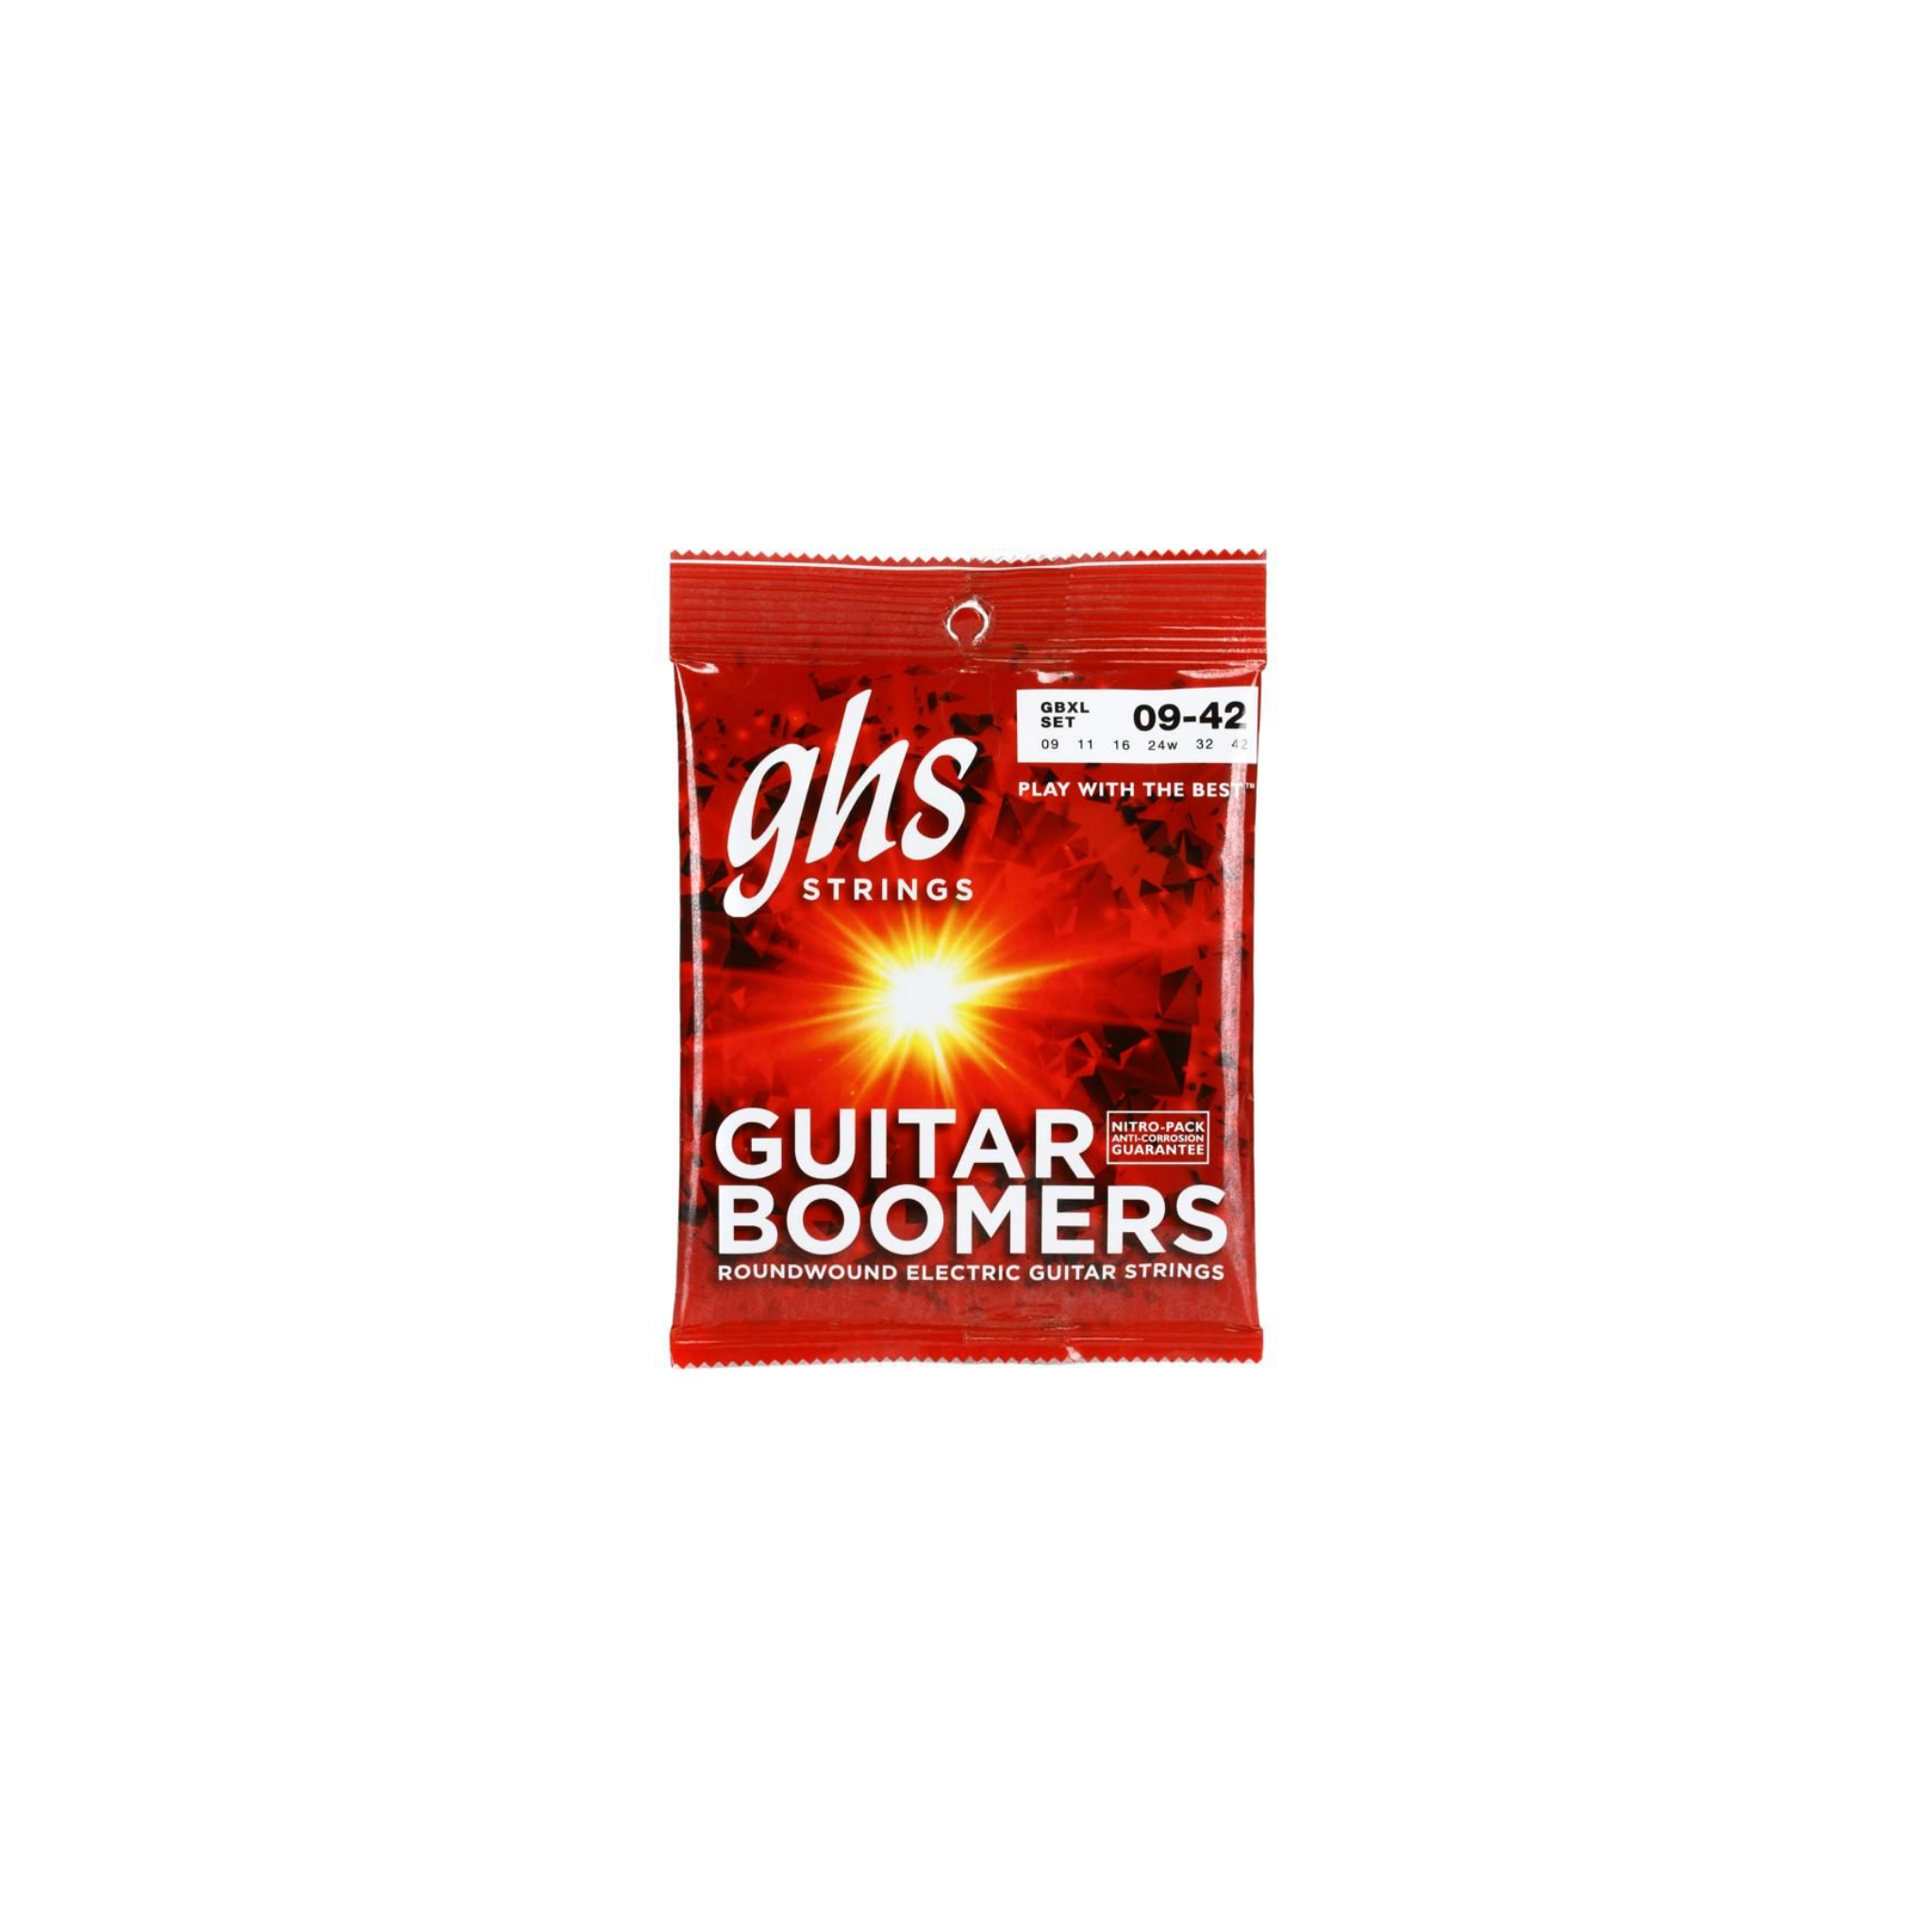 GHS Guitar Boomers 9-42